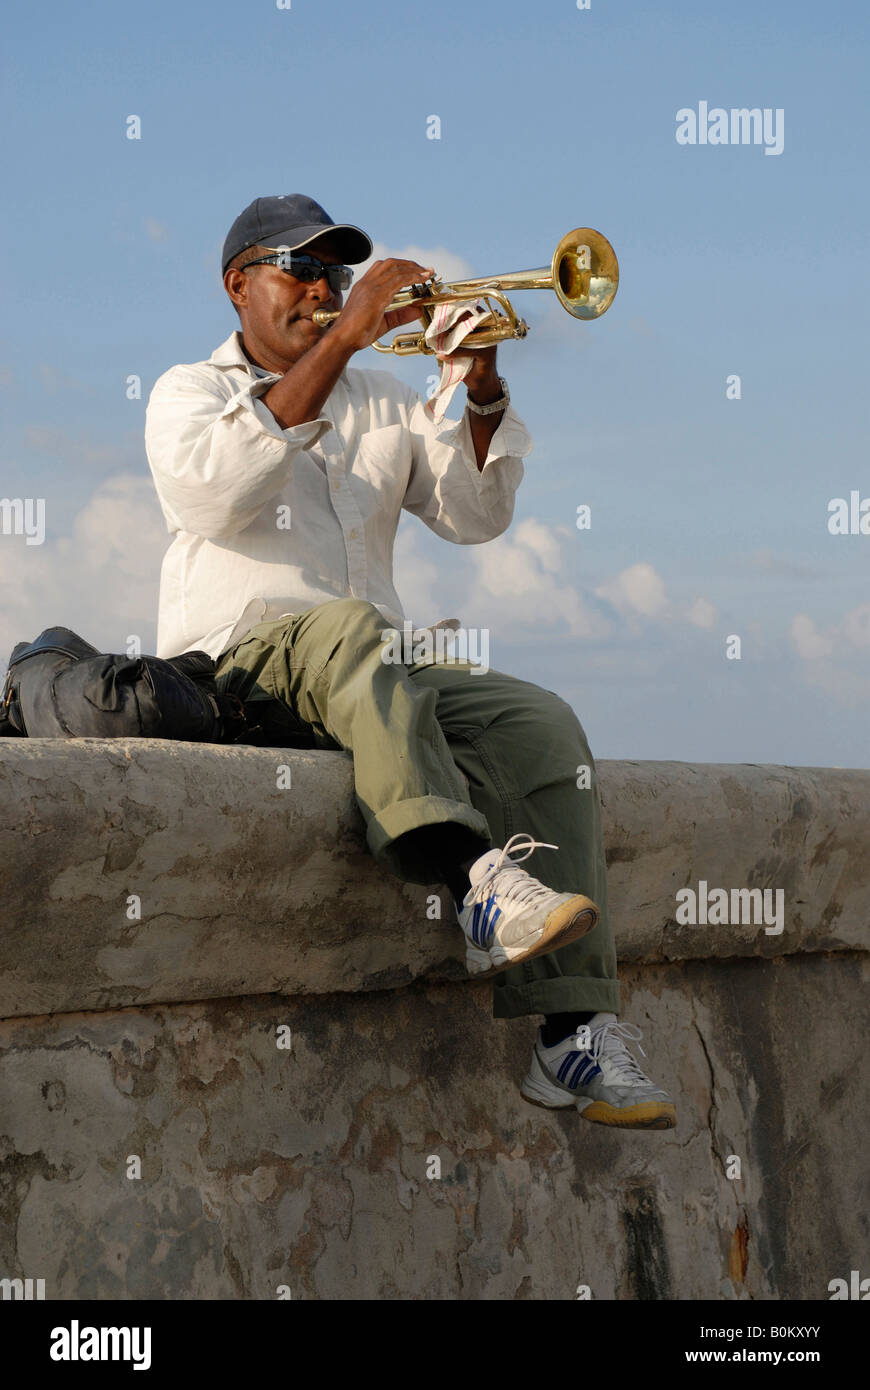 A middle aged man sitting on a wall and playing trumpet at the Malecon Boulevard in Havana Cuba April 2007 Stock Photo